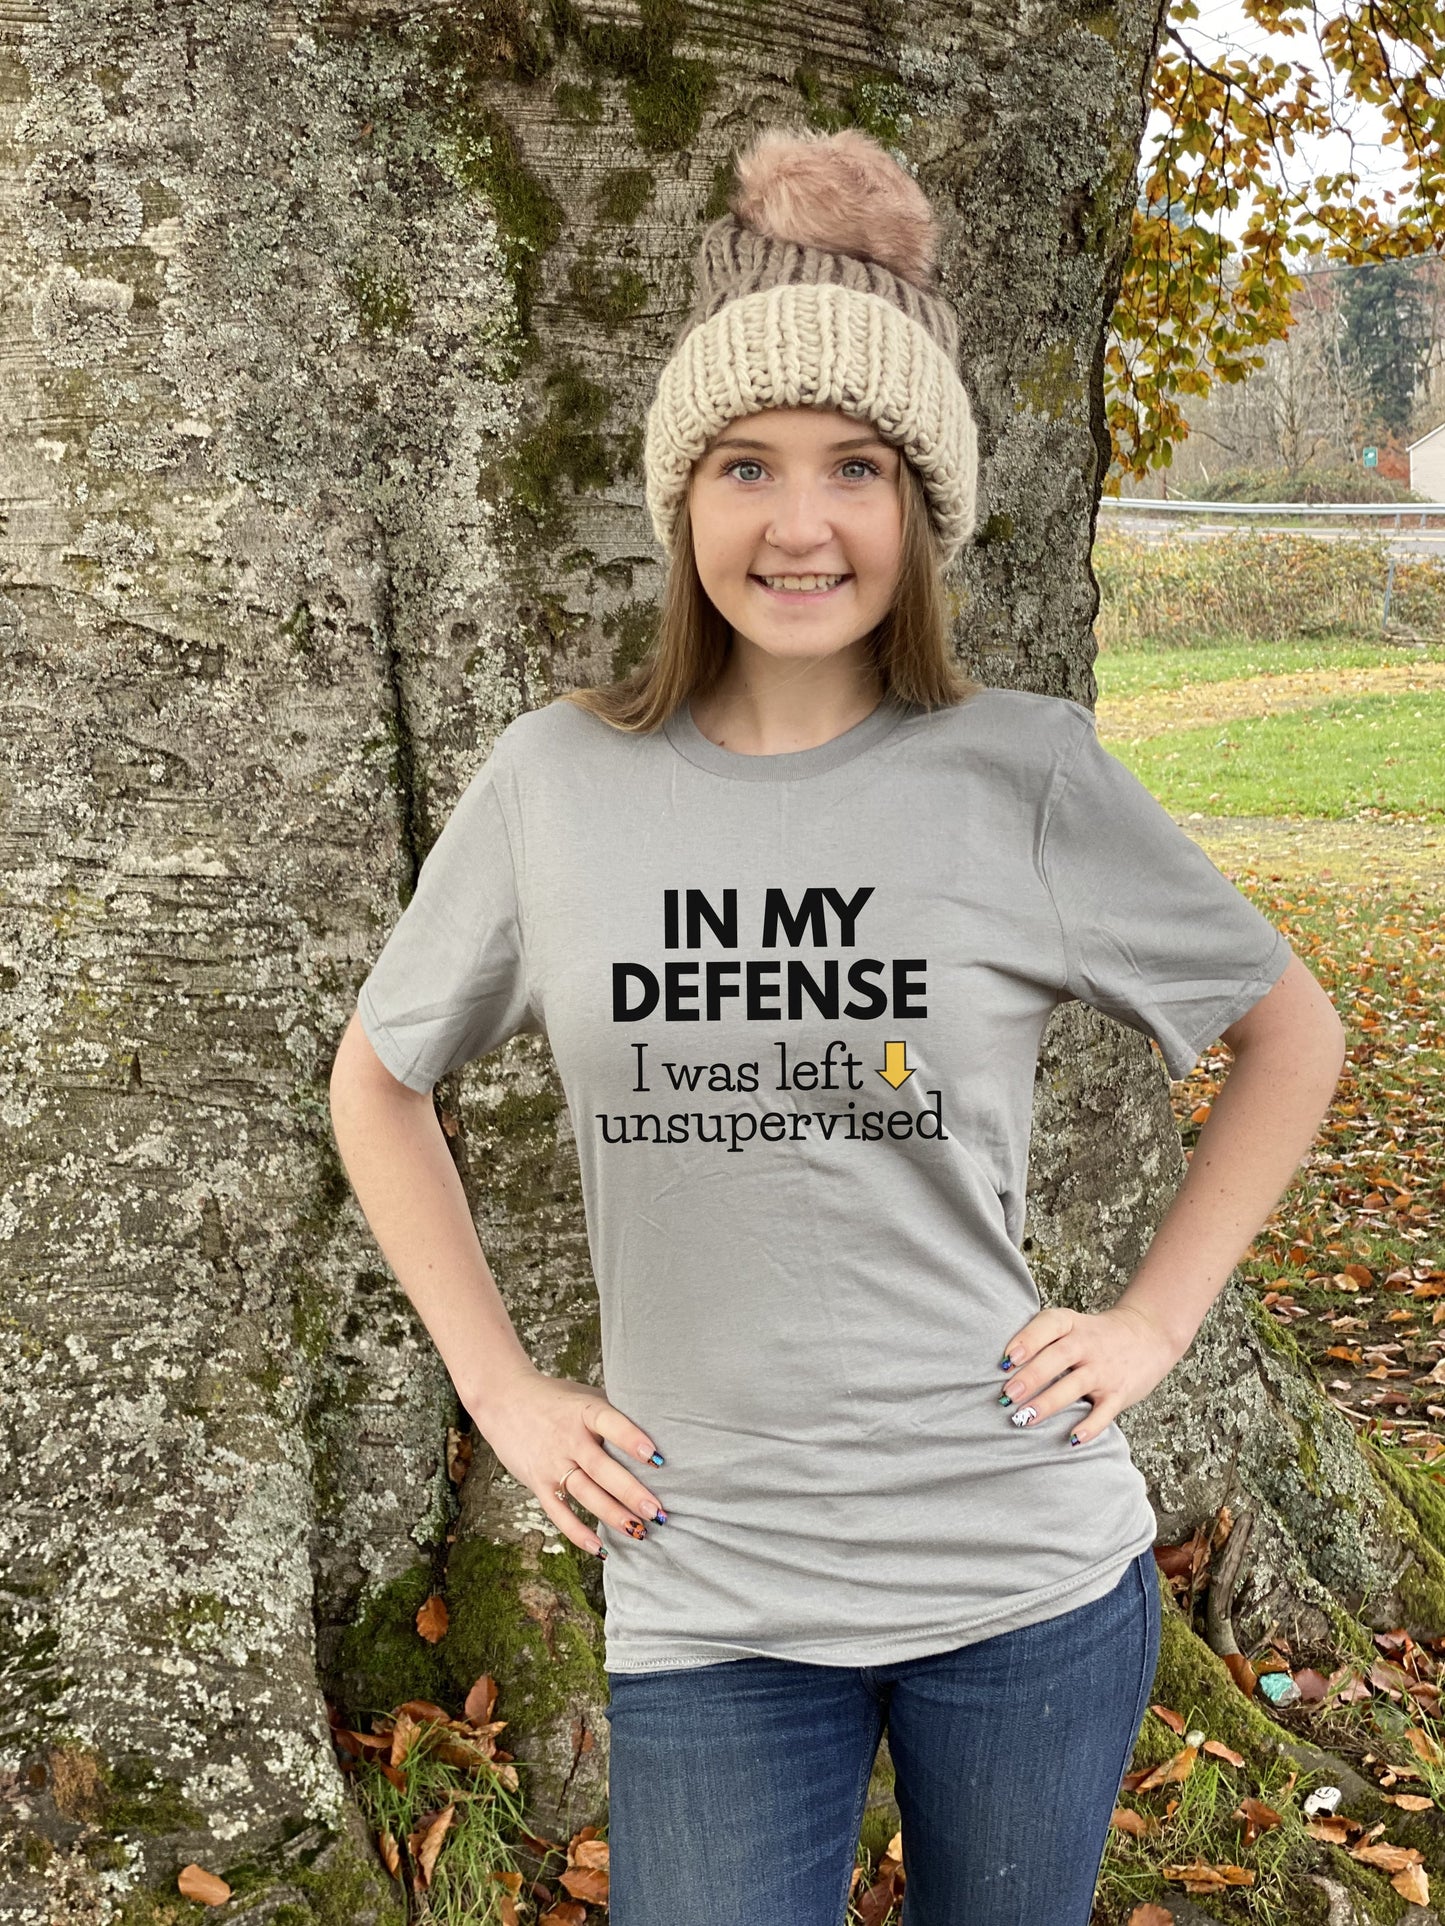 "In my defense I was left unsupervised" Tee